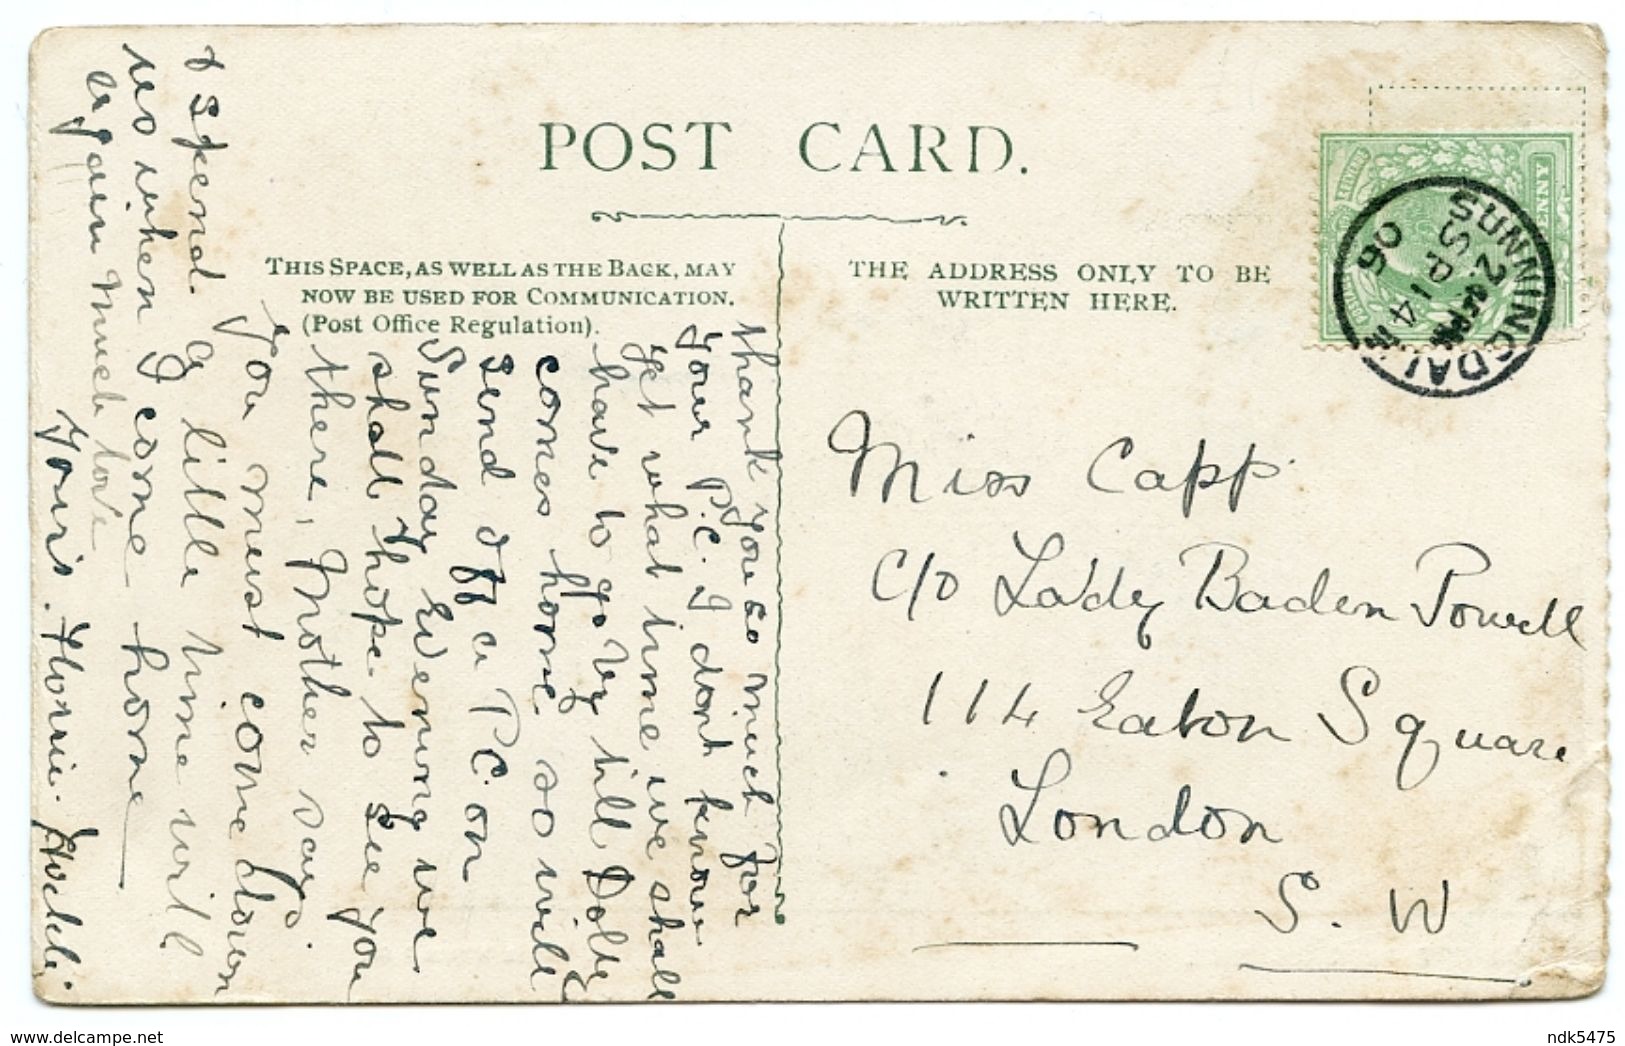 SCOUTING : LADY BADEN POWELL / READING - PROSPECT PARK / POSTMARK - SUNNINGDALE / LONDON, EATON SQUARE - Scouting